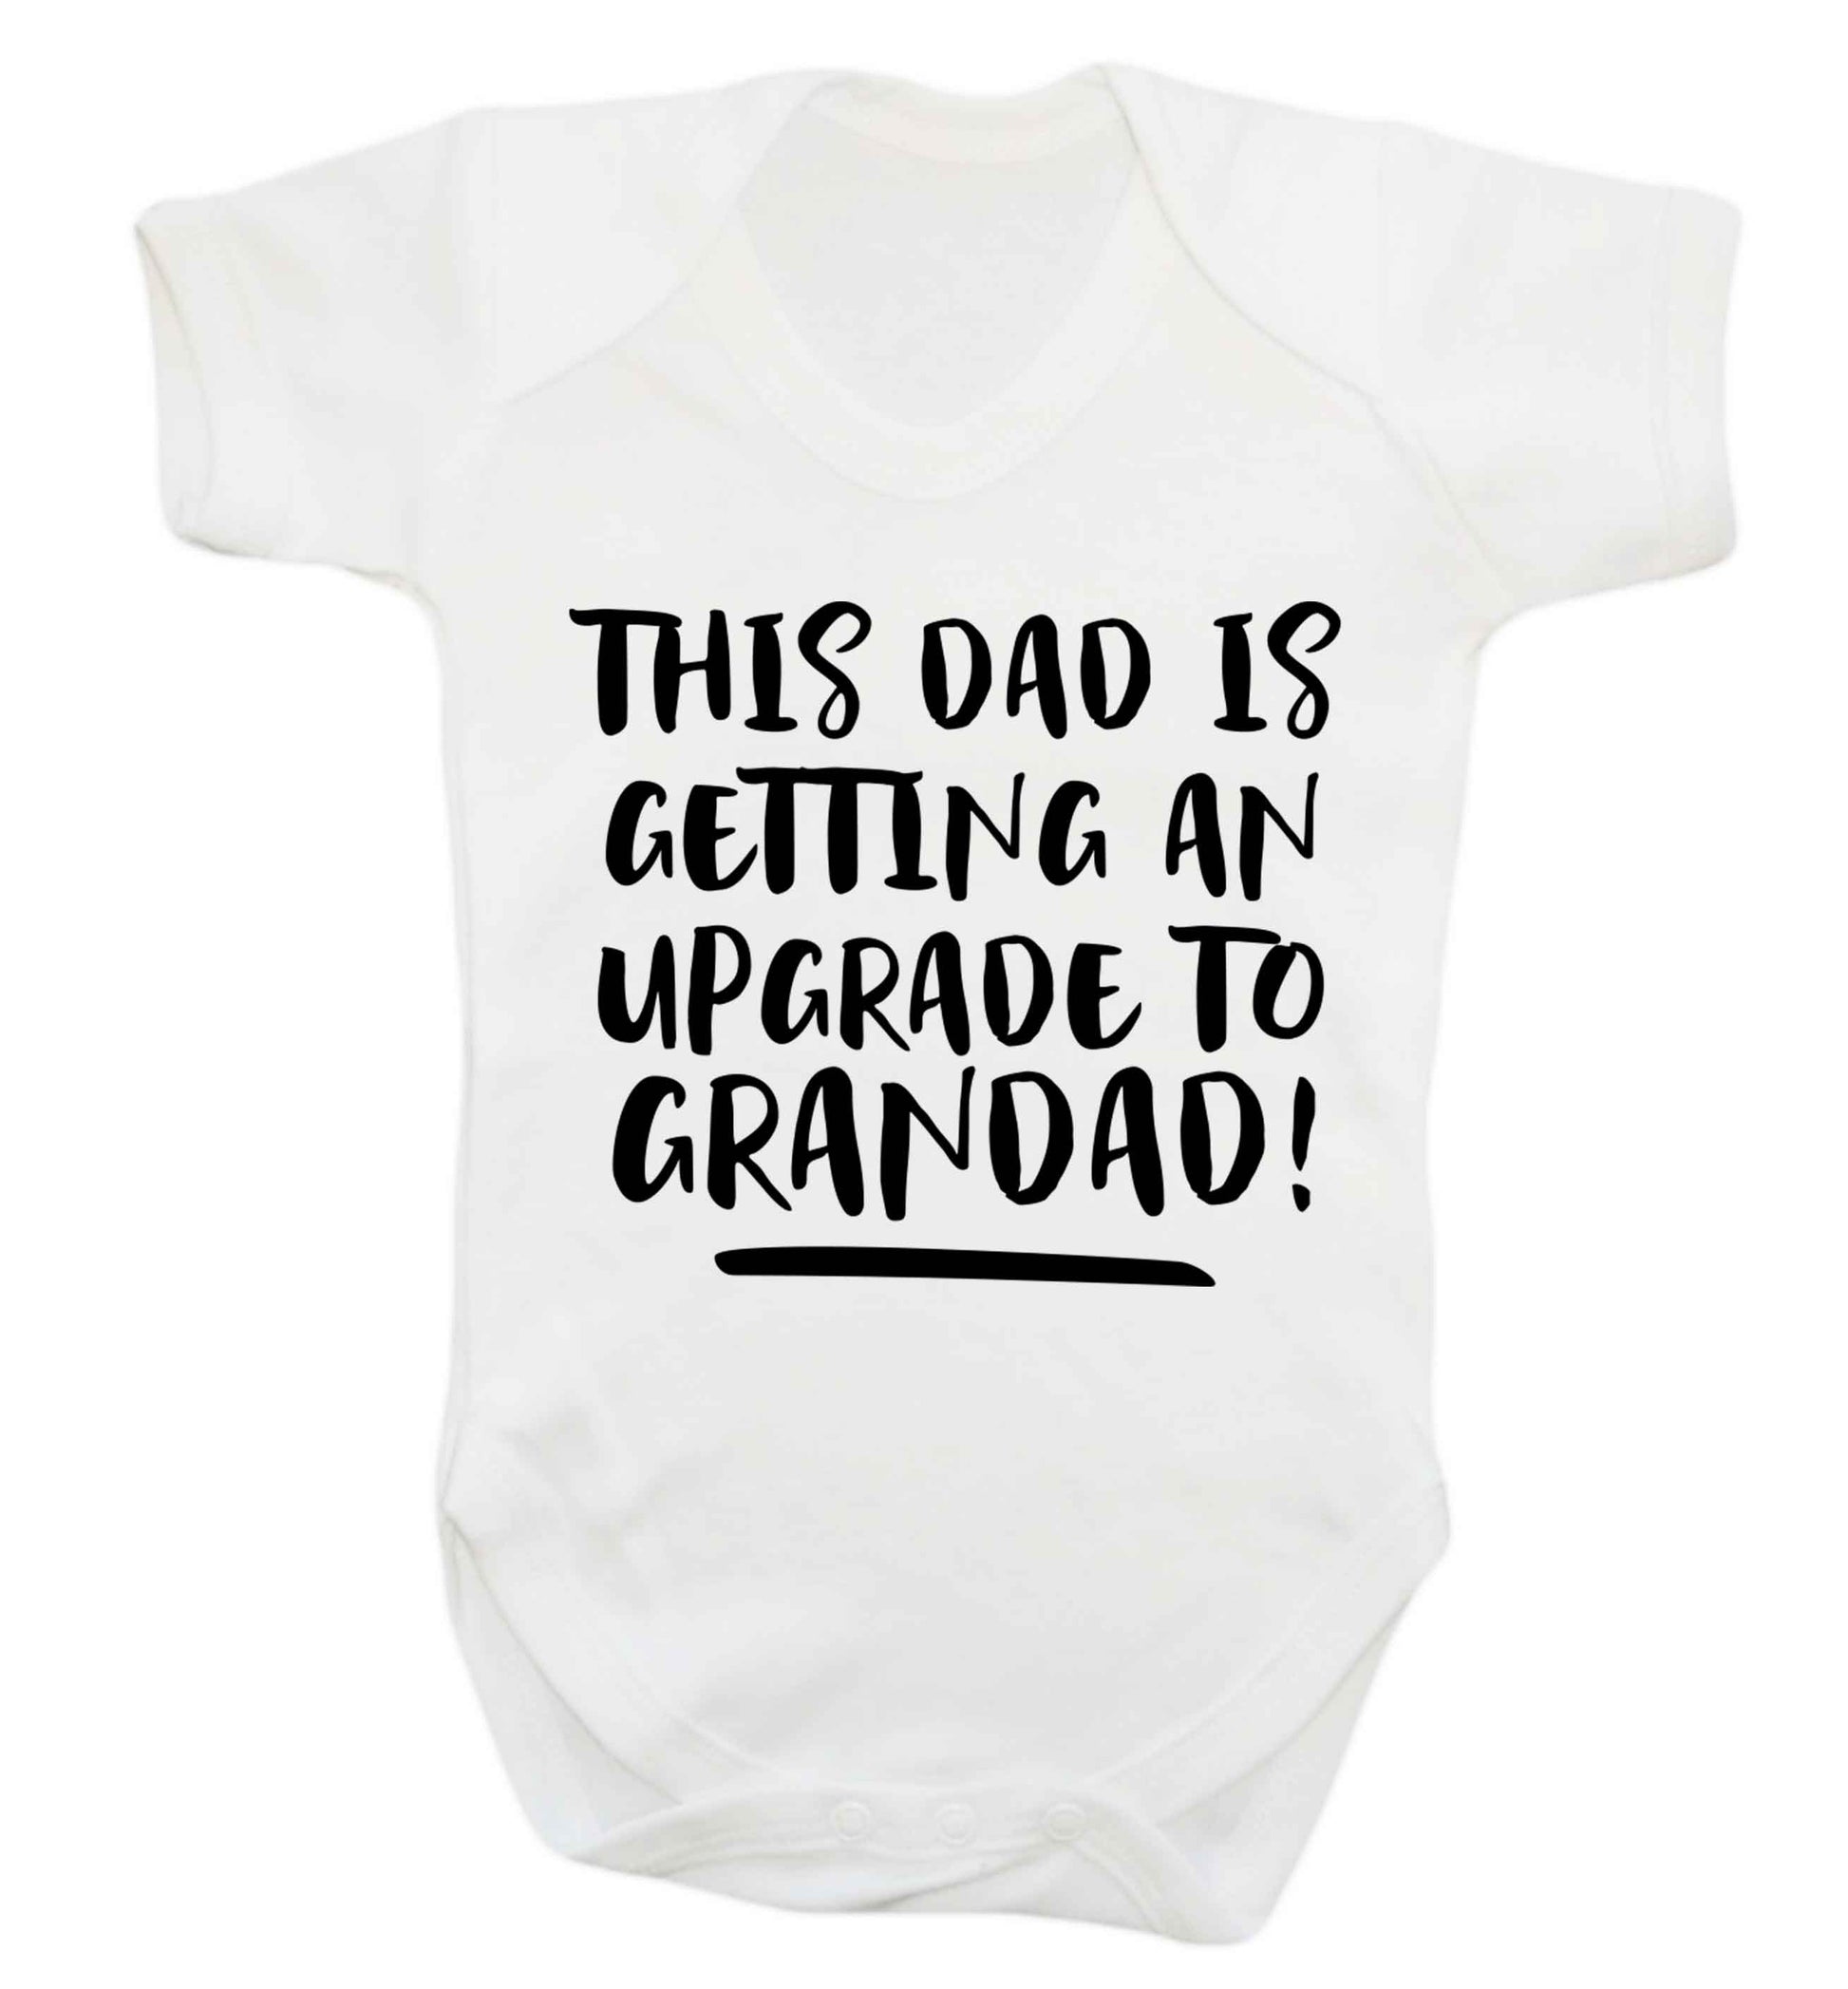 This dad is getting an upgrade to grandad! Baby Vest white 18-24 months